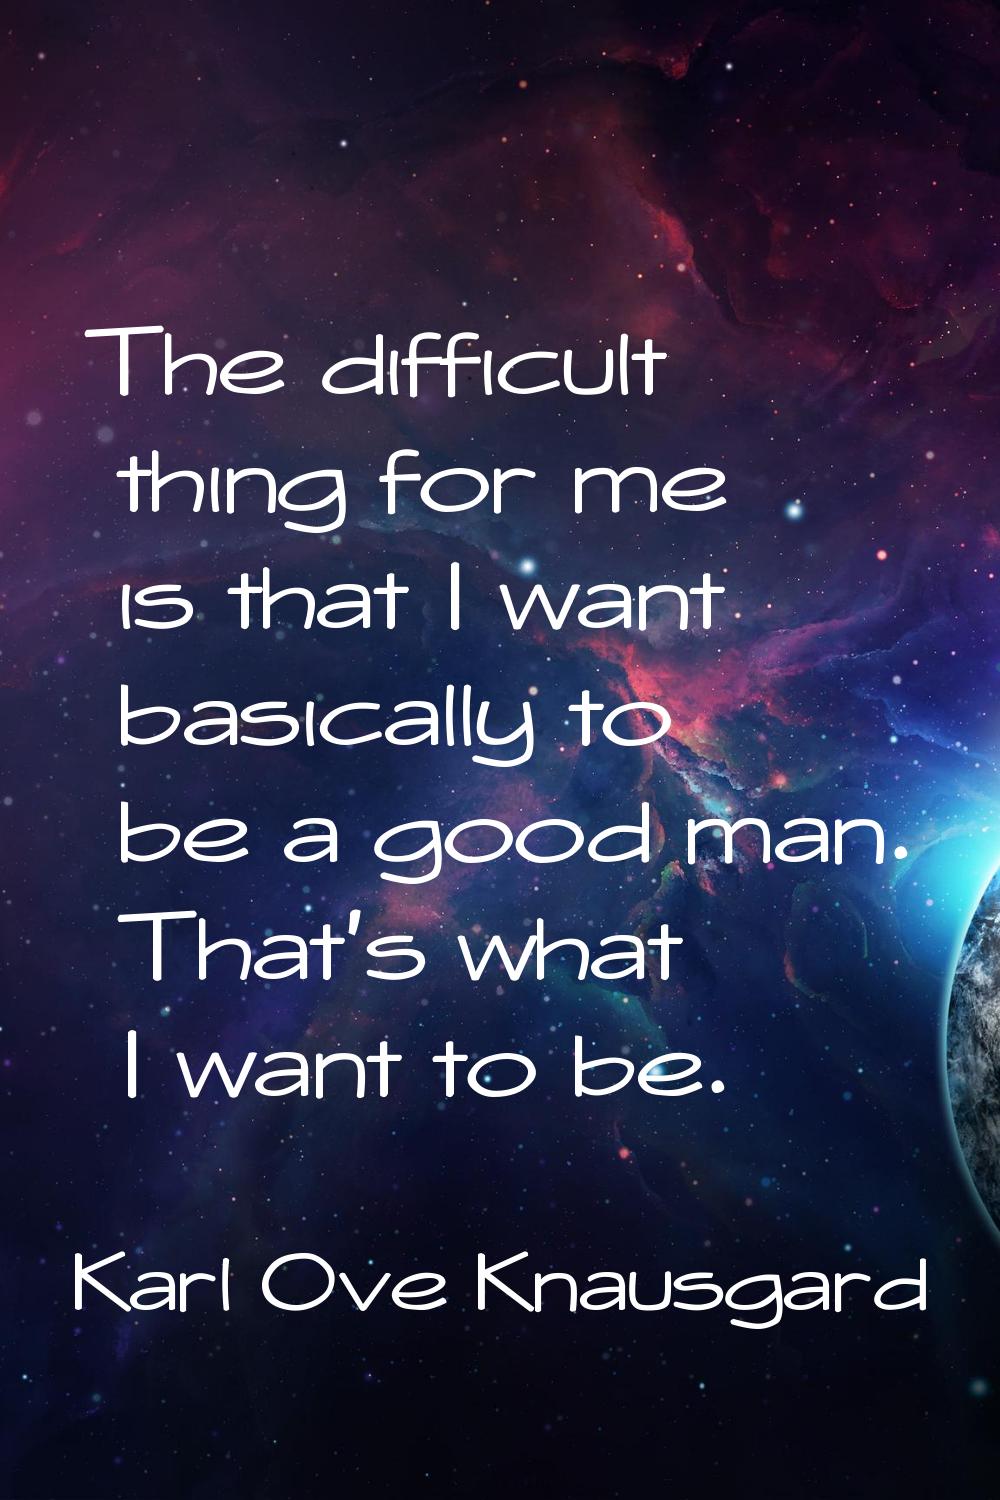 The difficult thing for me is that I want basically to be a good man. That's what I want to be.